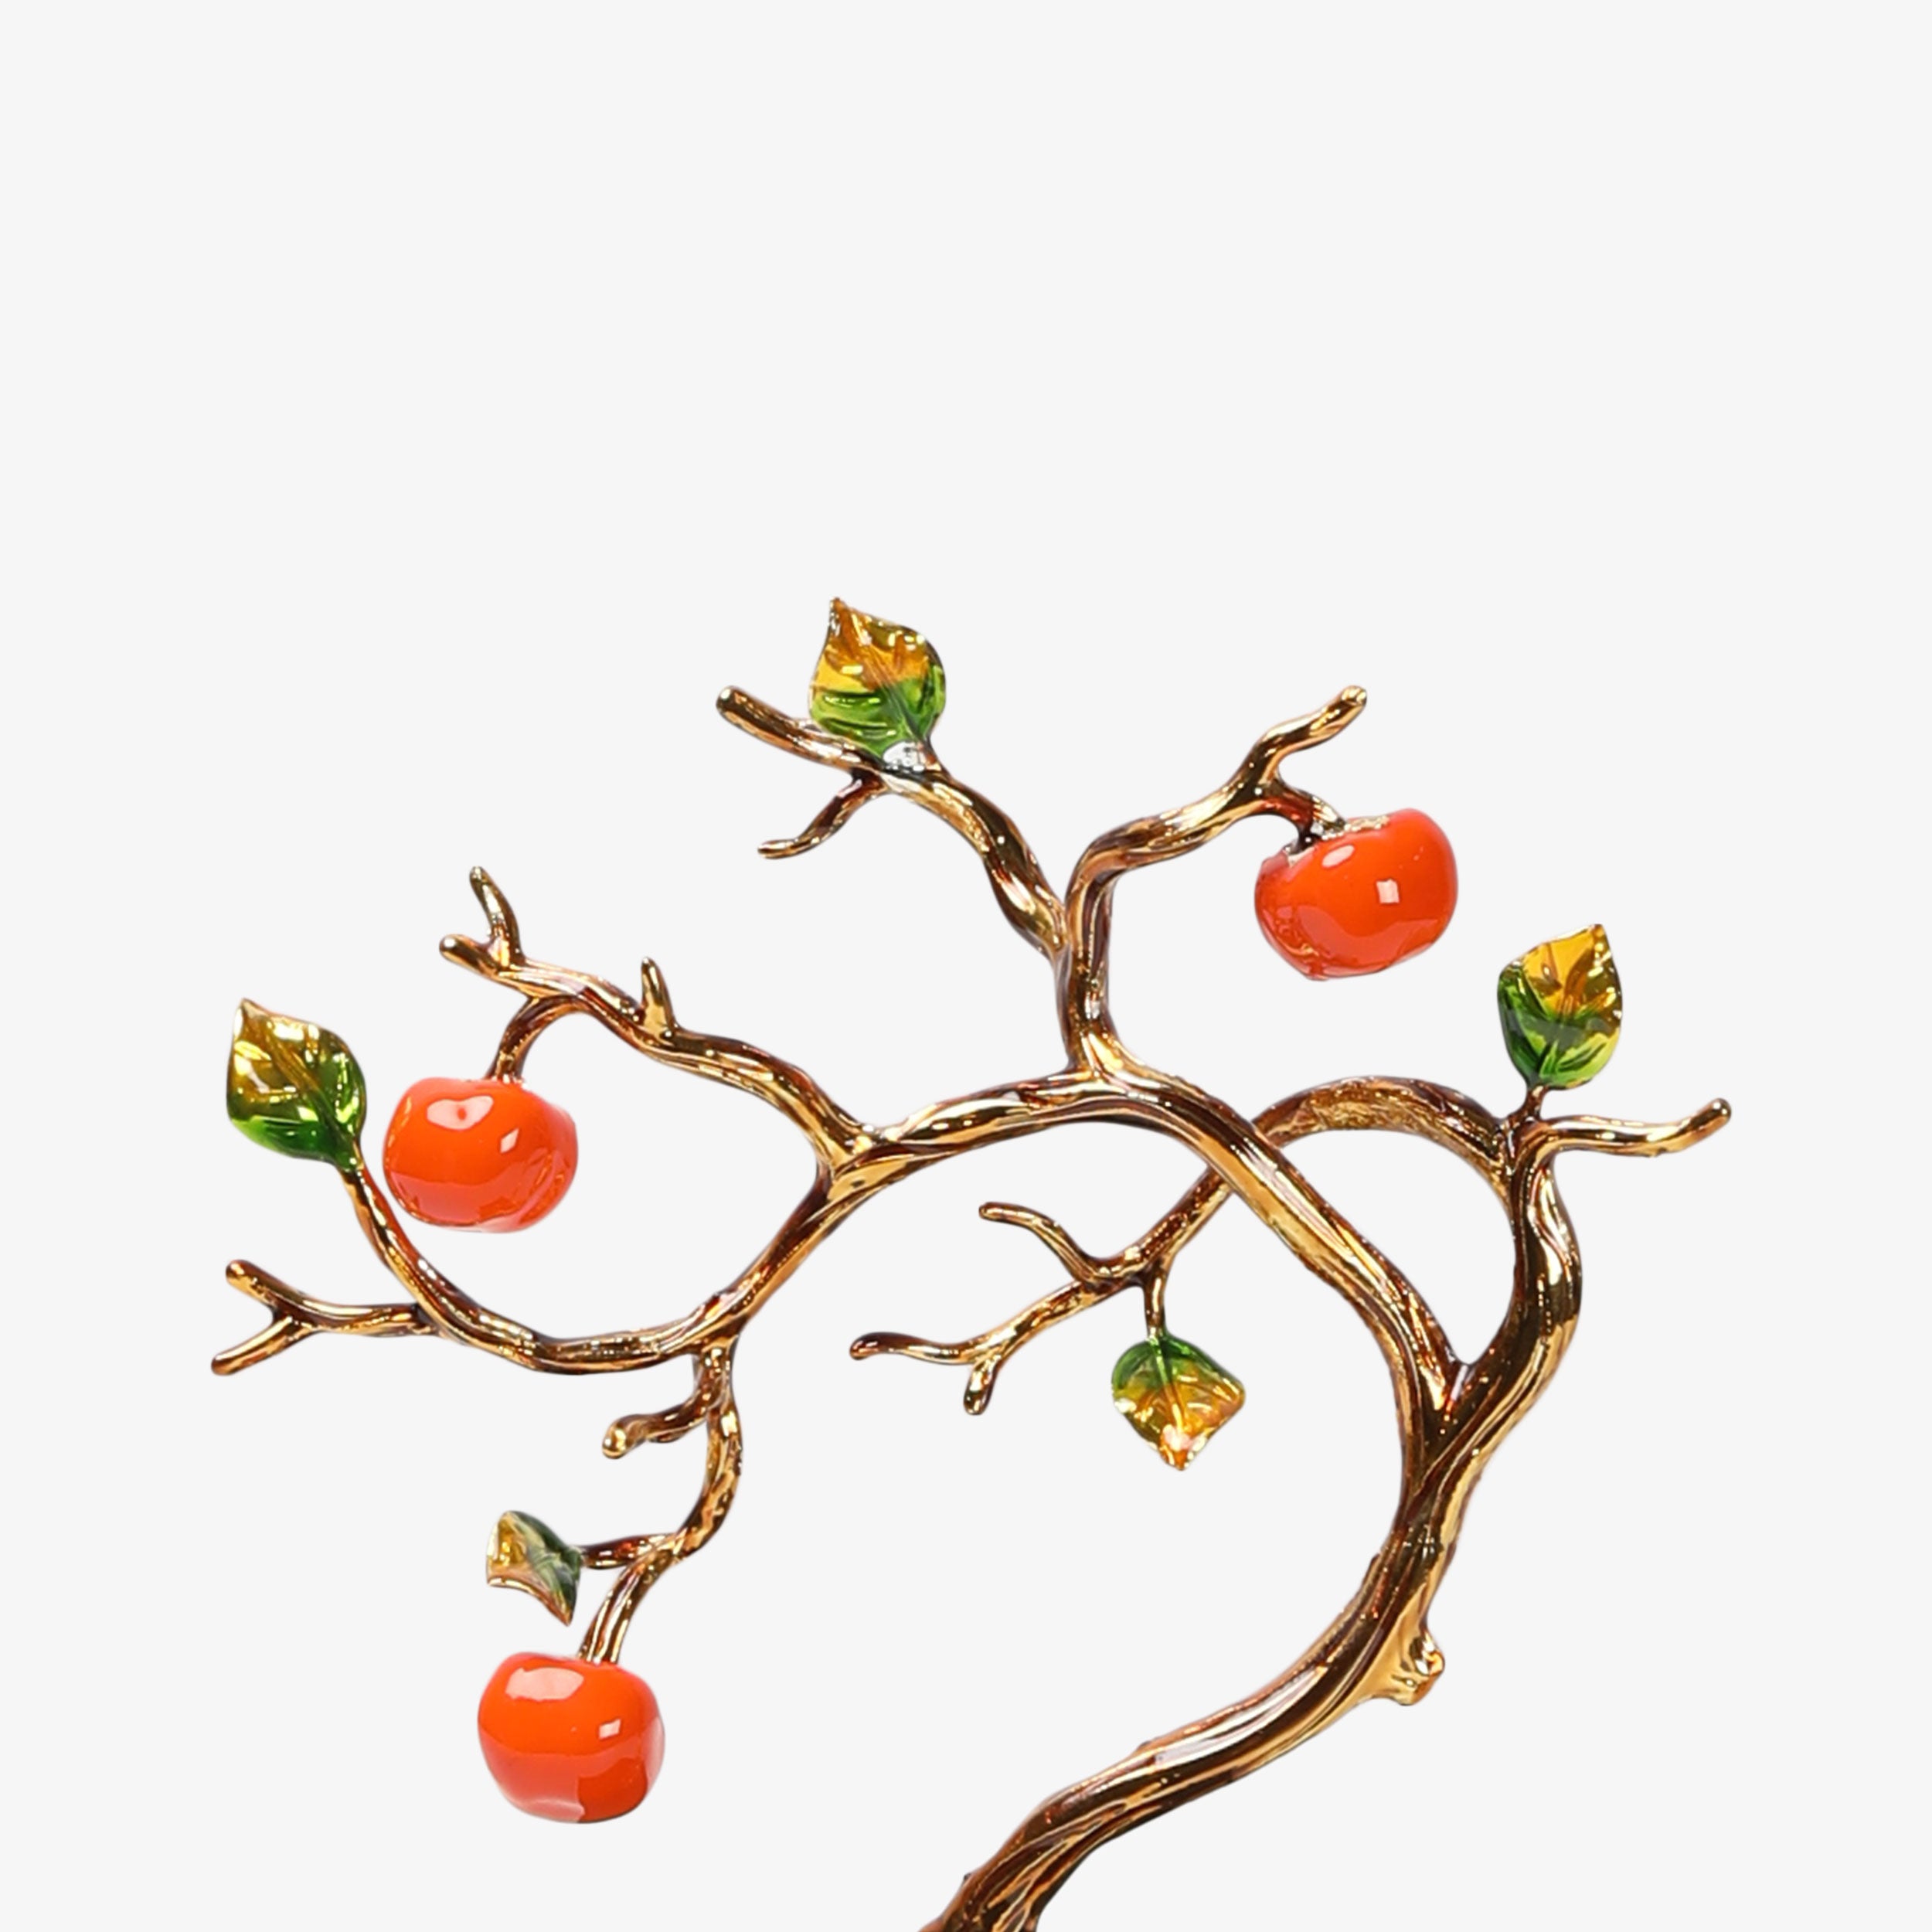 Metal Fruit Tree with Marble Base